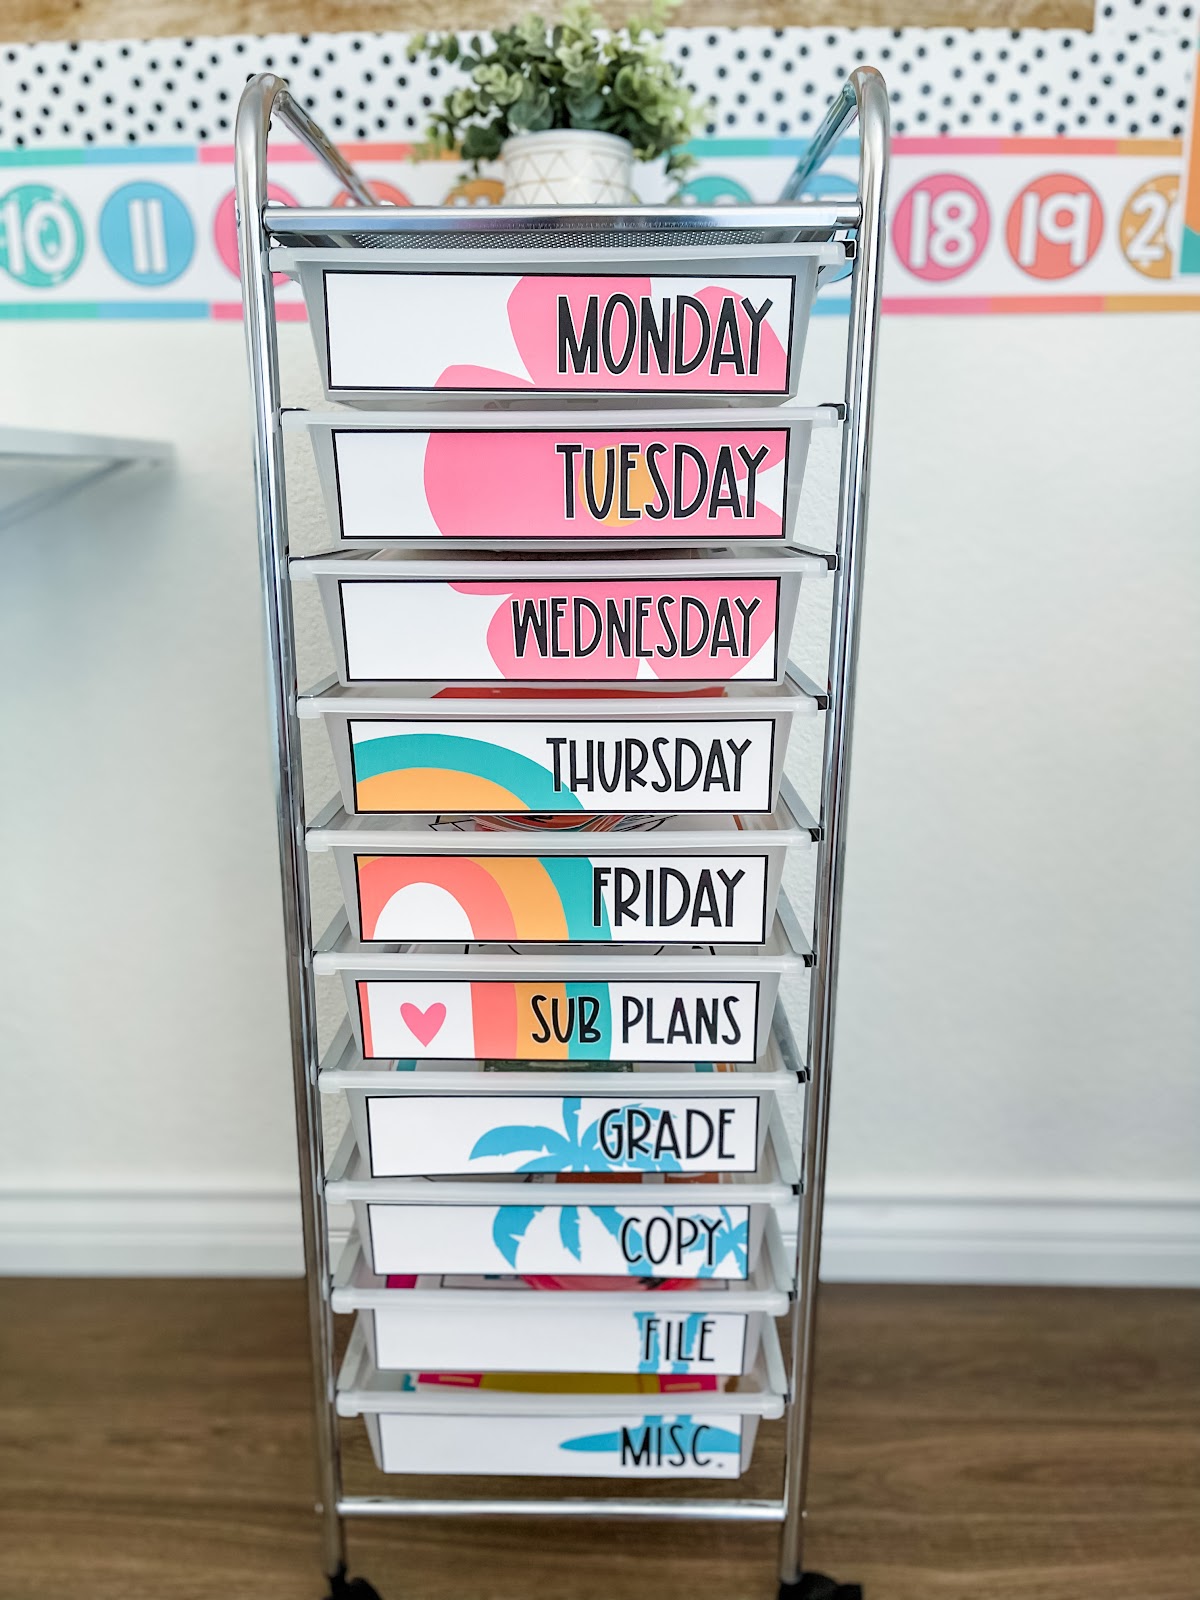 This image shows a 10 drawer cart decorated with labels creating a tropical theme all the way down. The labels read the days of the week and then "Sub plans", "grade", "copy", "file", and "Misc.". The tropical theme is a pink flower, a rainbow, and blue palm trees. 